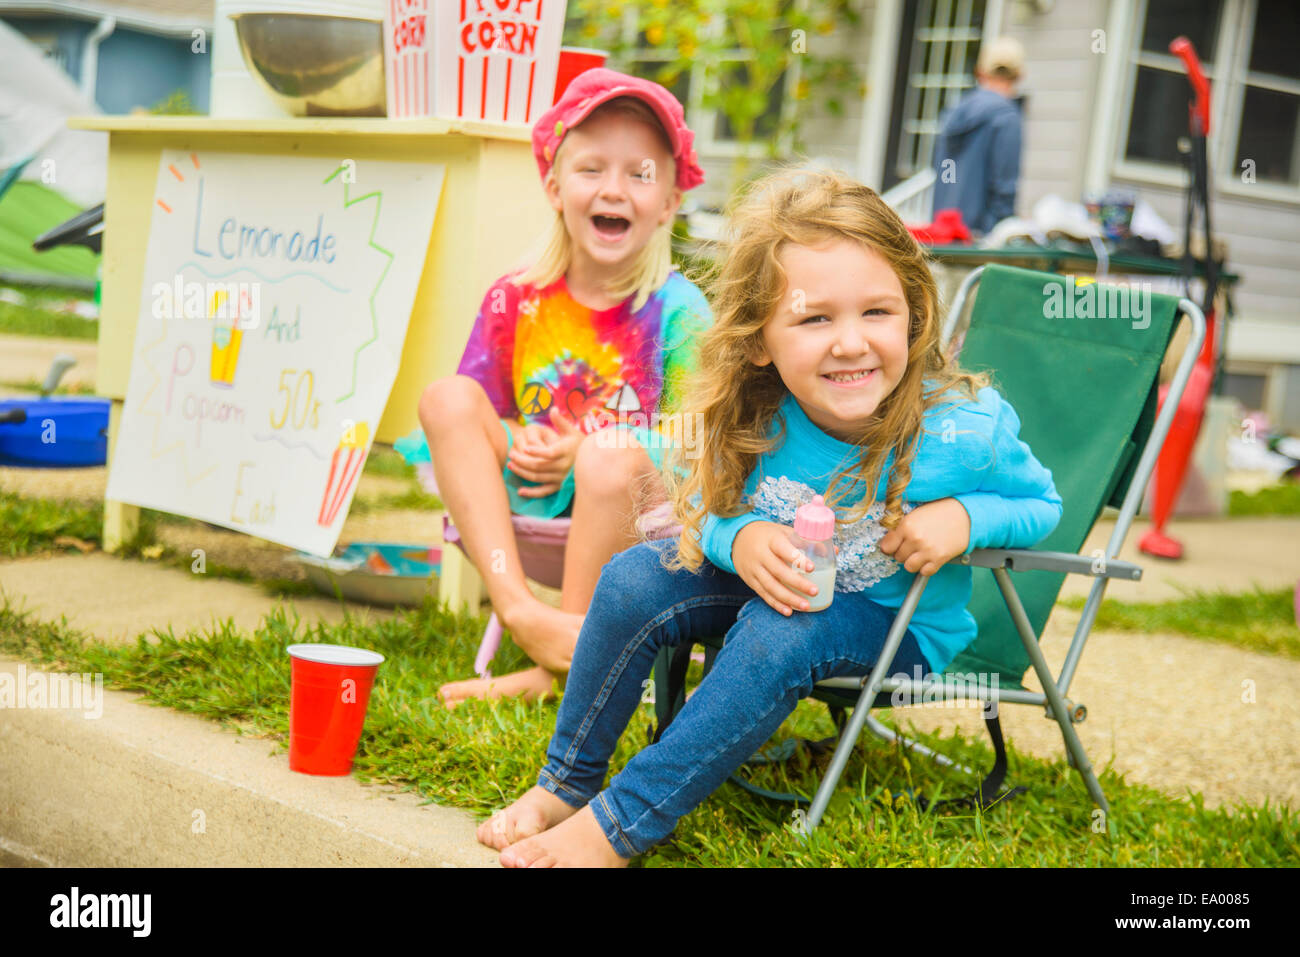 Candid portrait of two smiling girls selling lemonade and popcorn at yard sale Stock Photo